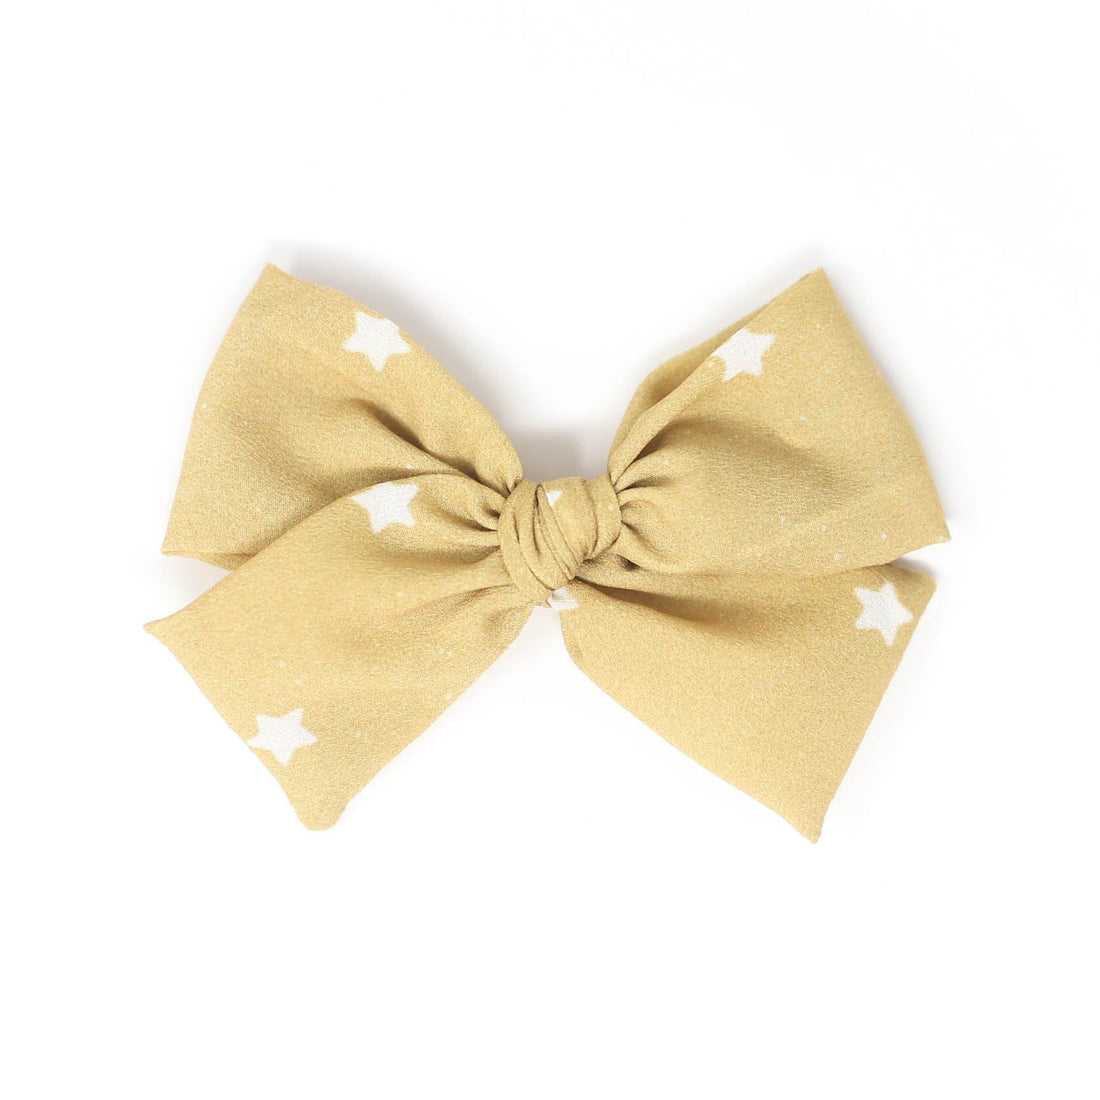 Shine Bright like a Star with the Gold Stars | Midi Bow: The Must-Have Hairpiece of the Season